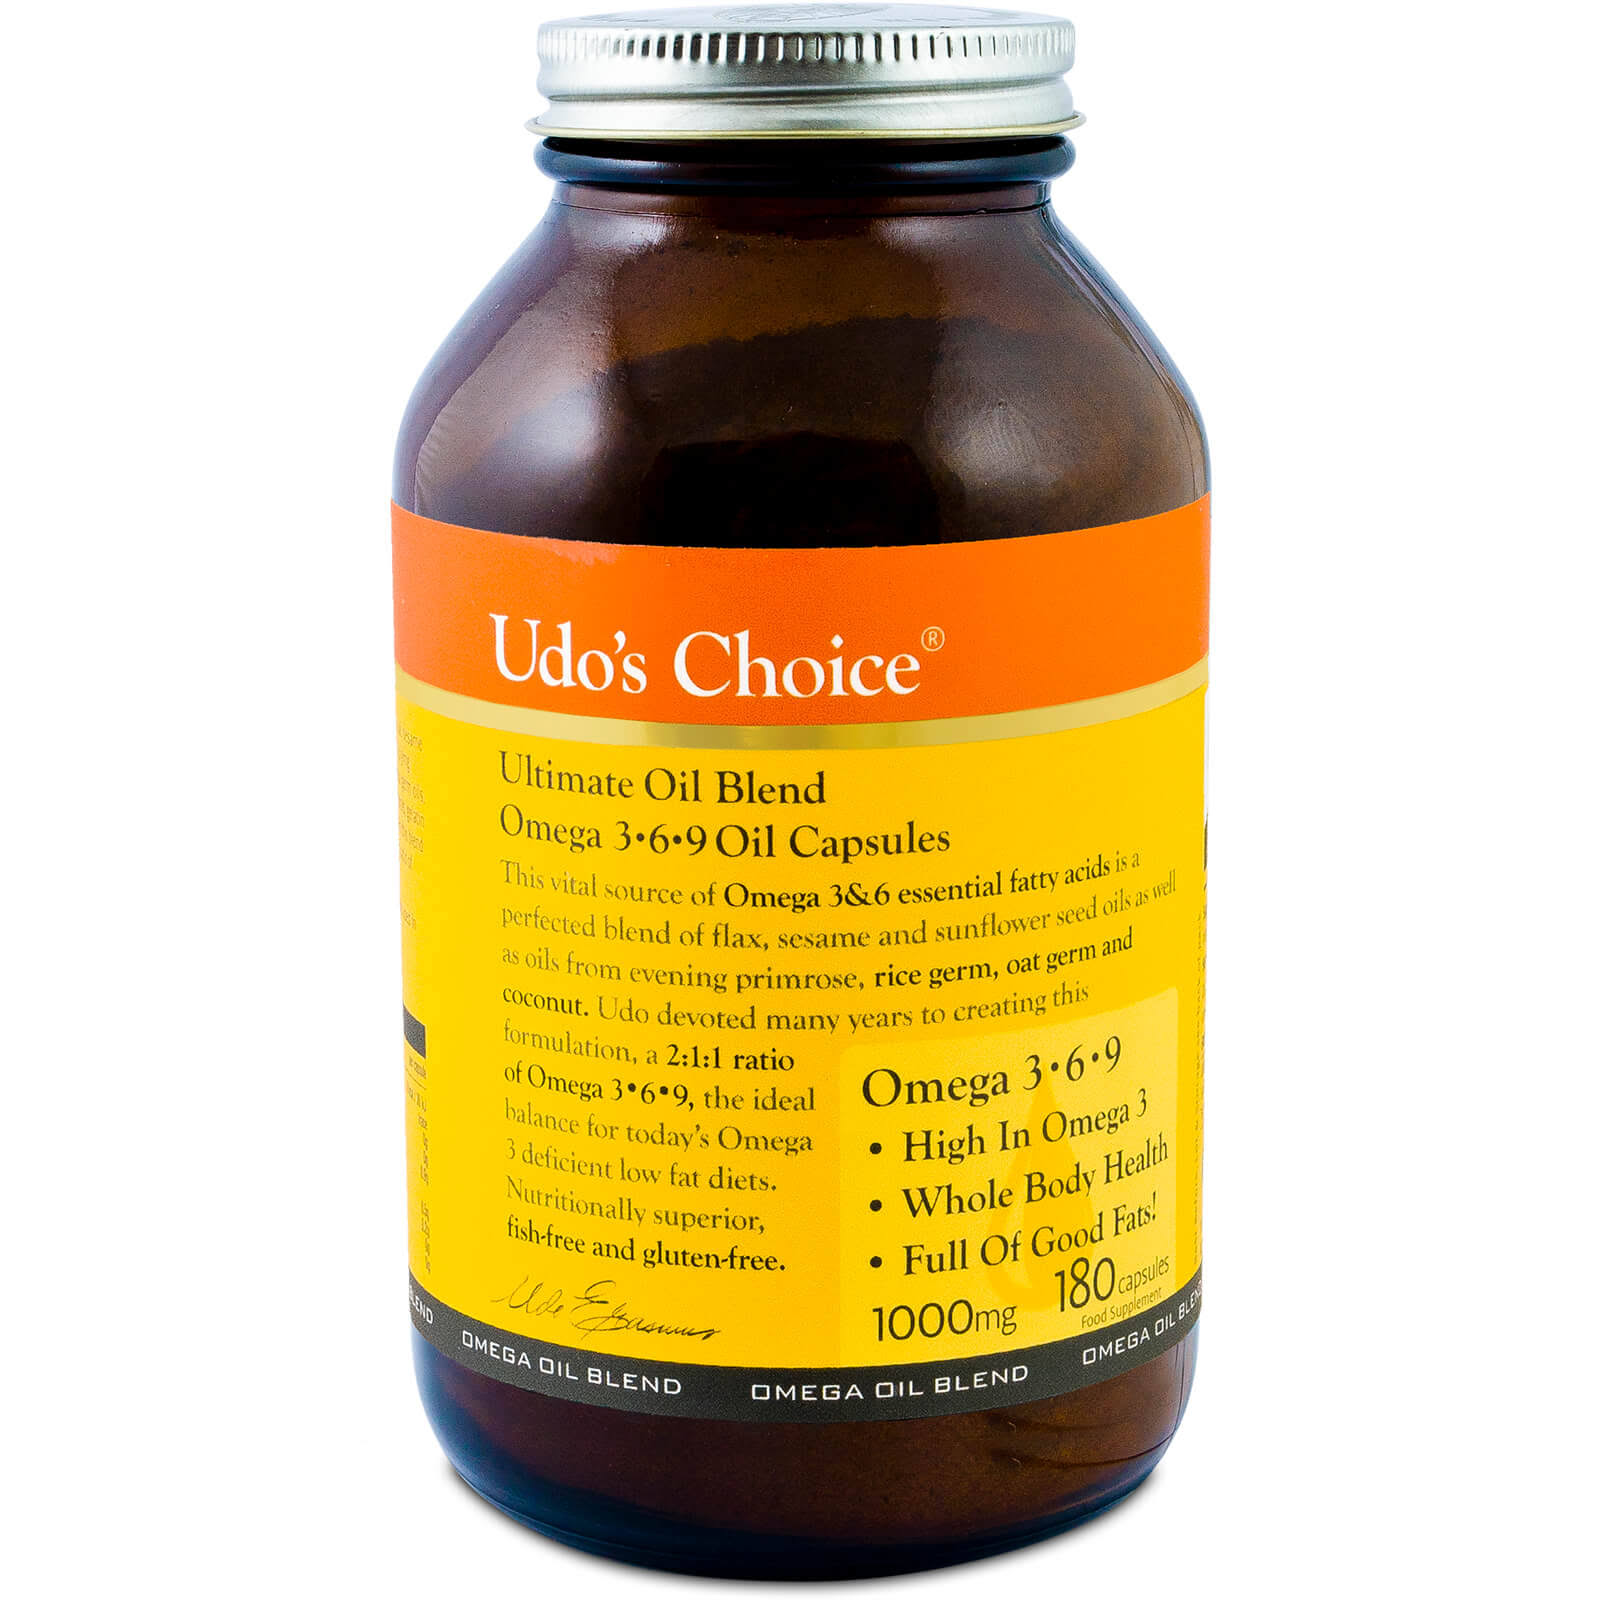 Udos Choice 1000mg, 180 Capsules (Ultimate Oil Blend)